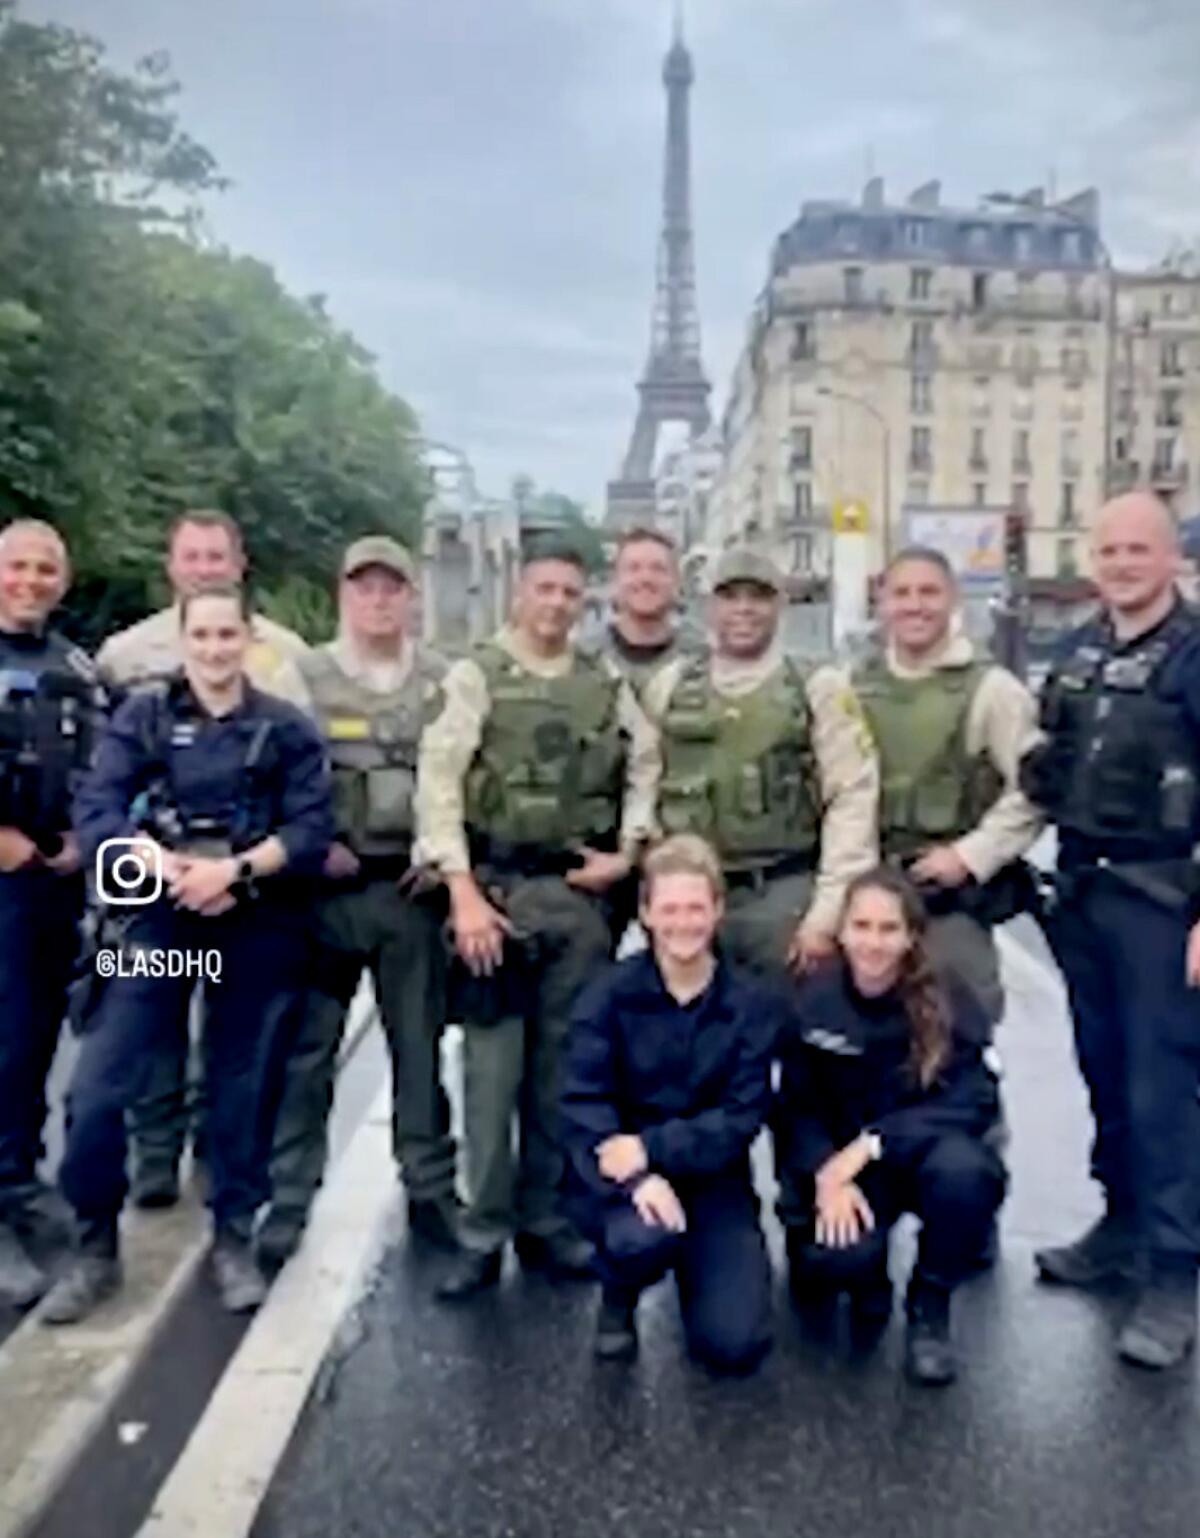 Members of the Los Angeles Sheriff's Department in Paris for the 2024 Olympics.